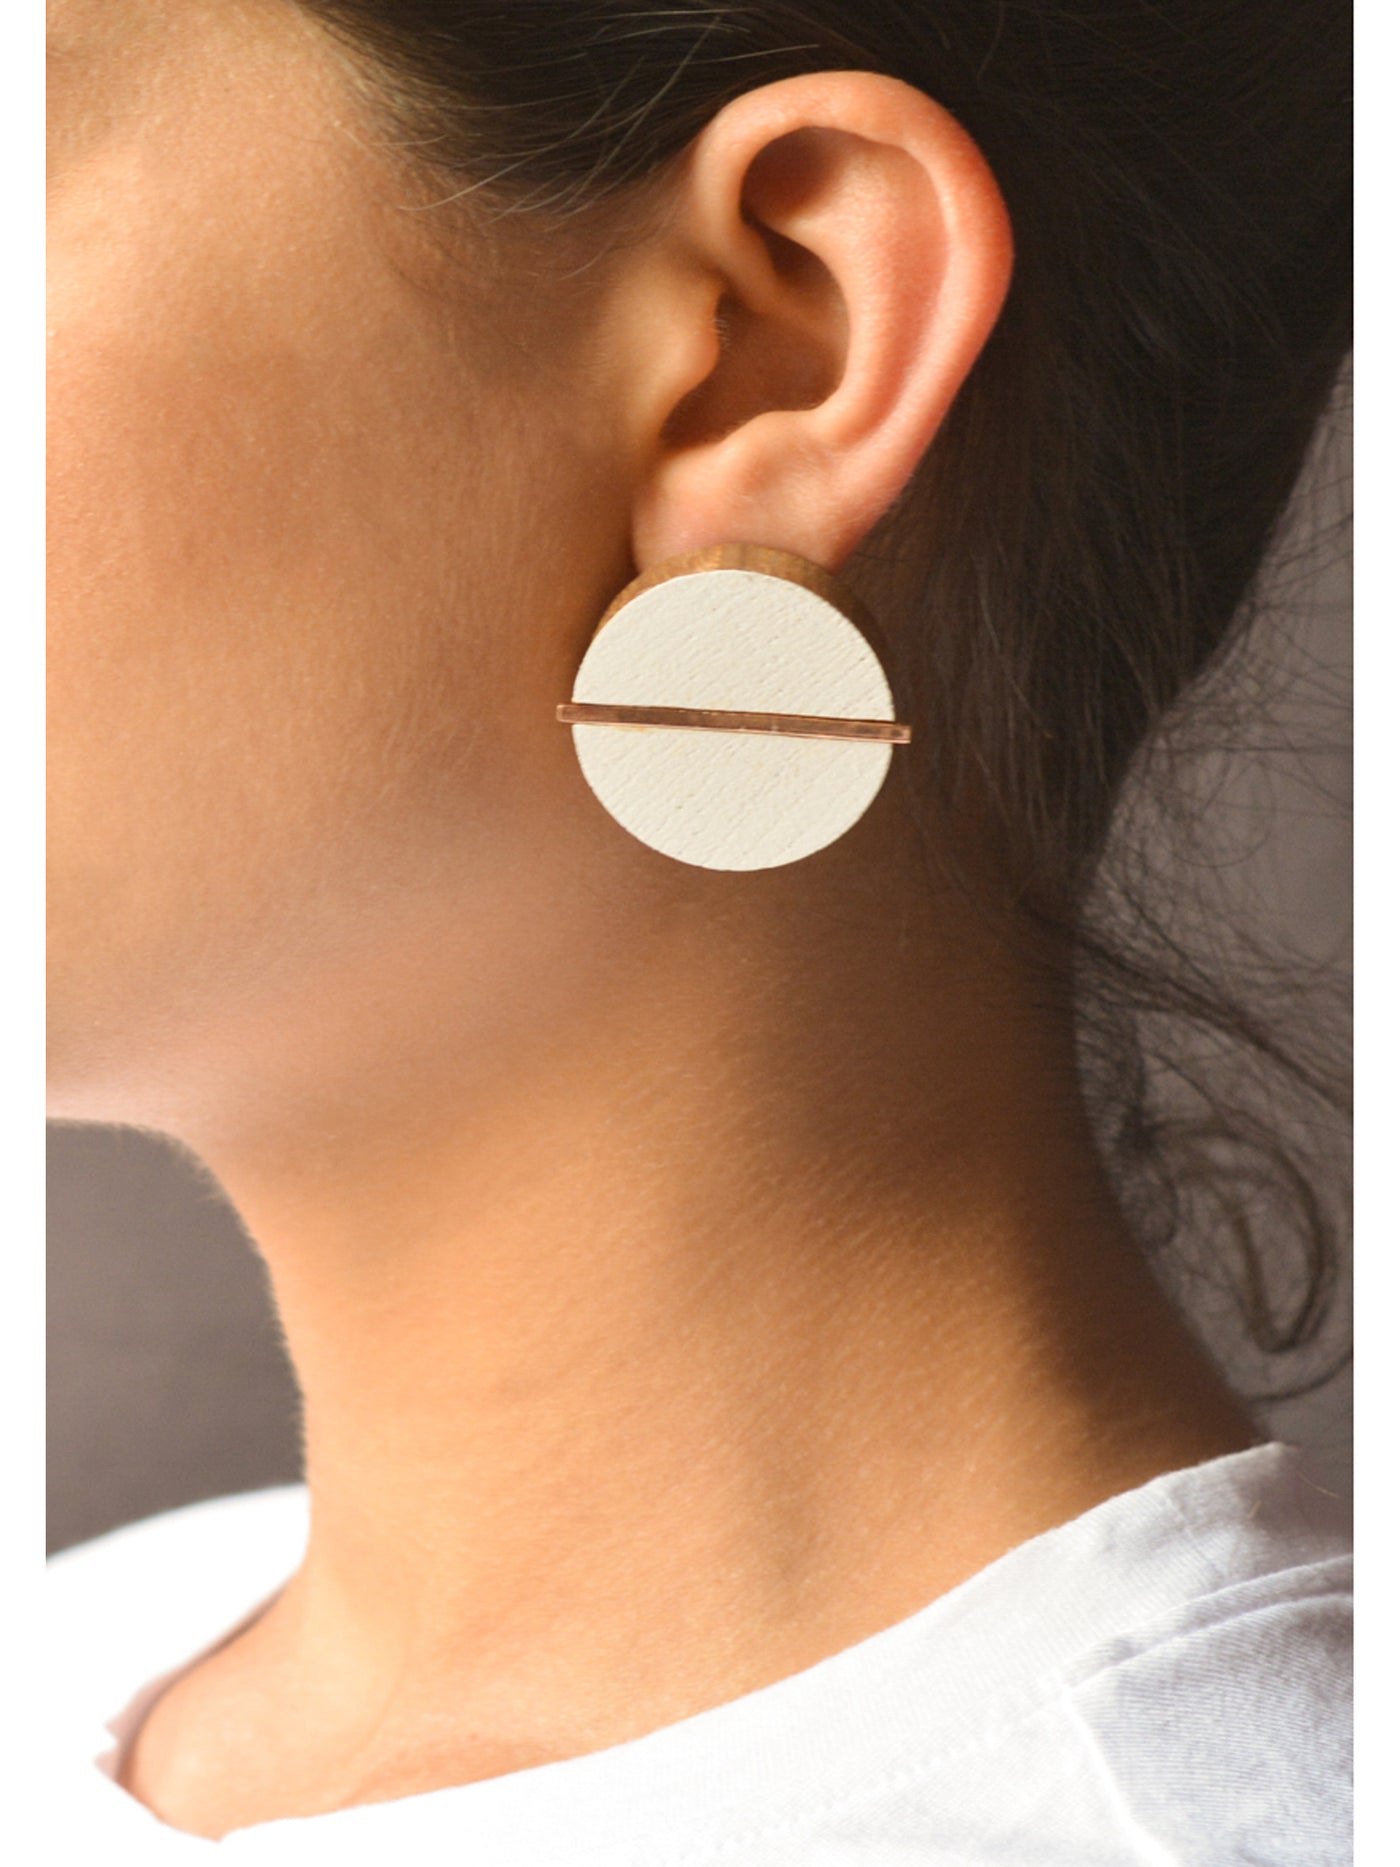 earrings are handcrafted using reclaimed teak wood and rose gold plated brass.